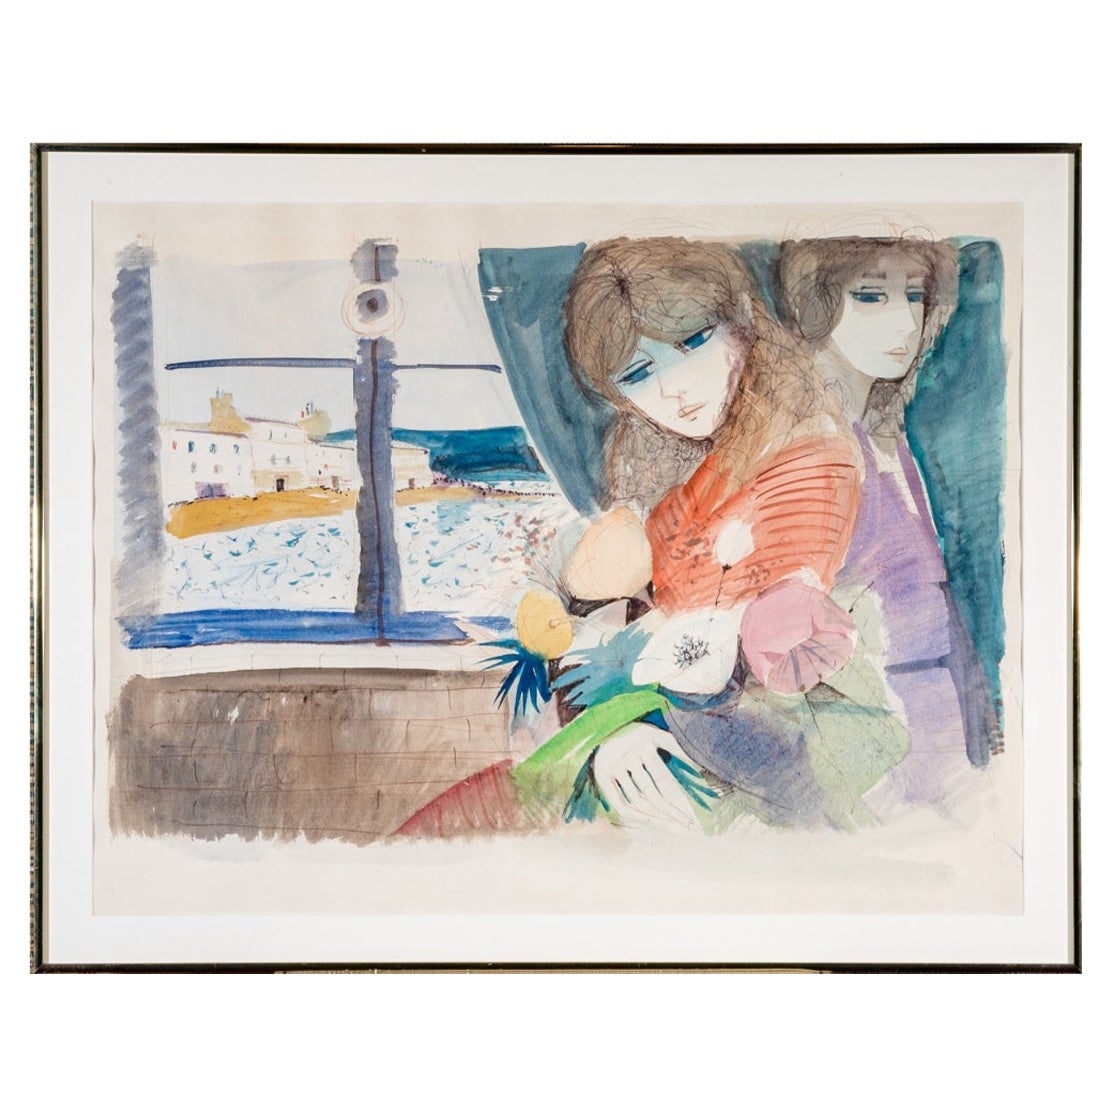 Charles Levier (French, 1920 - 2003) Large Watercolor & Ink 2 Women With Flowers For Sale